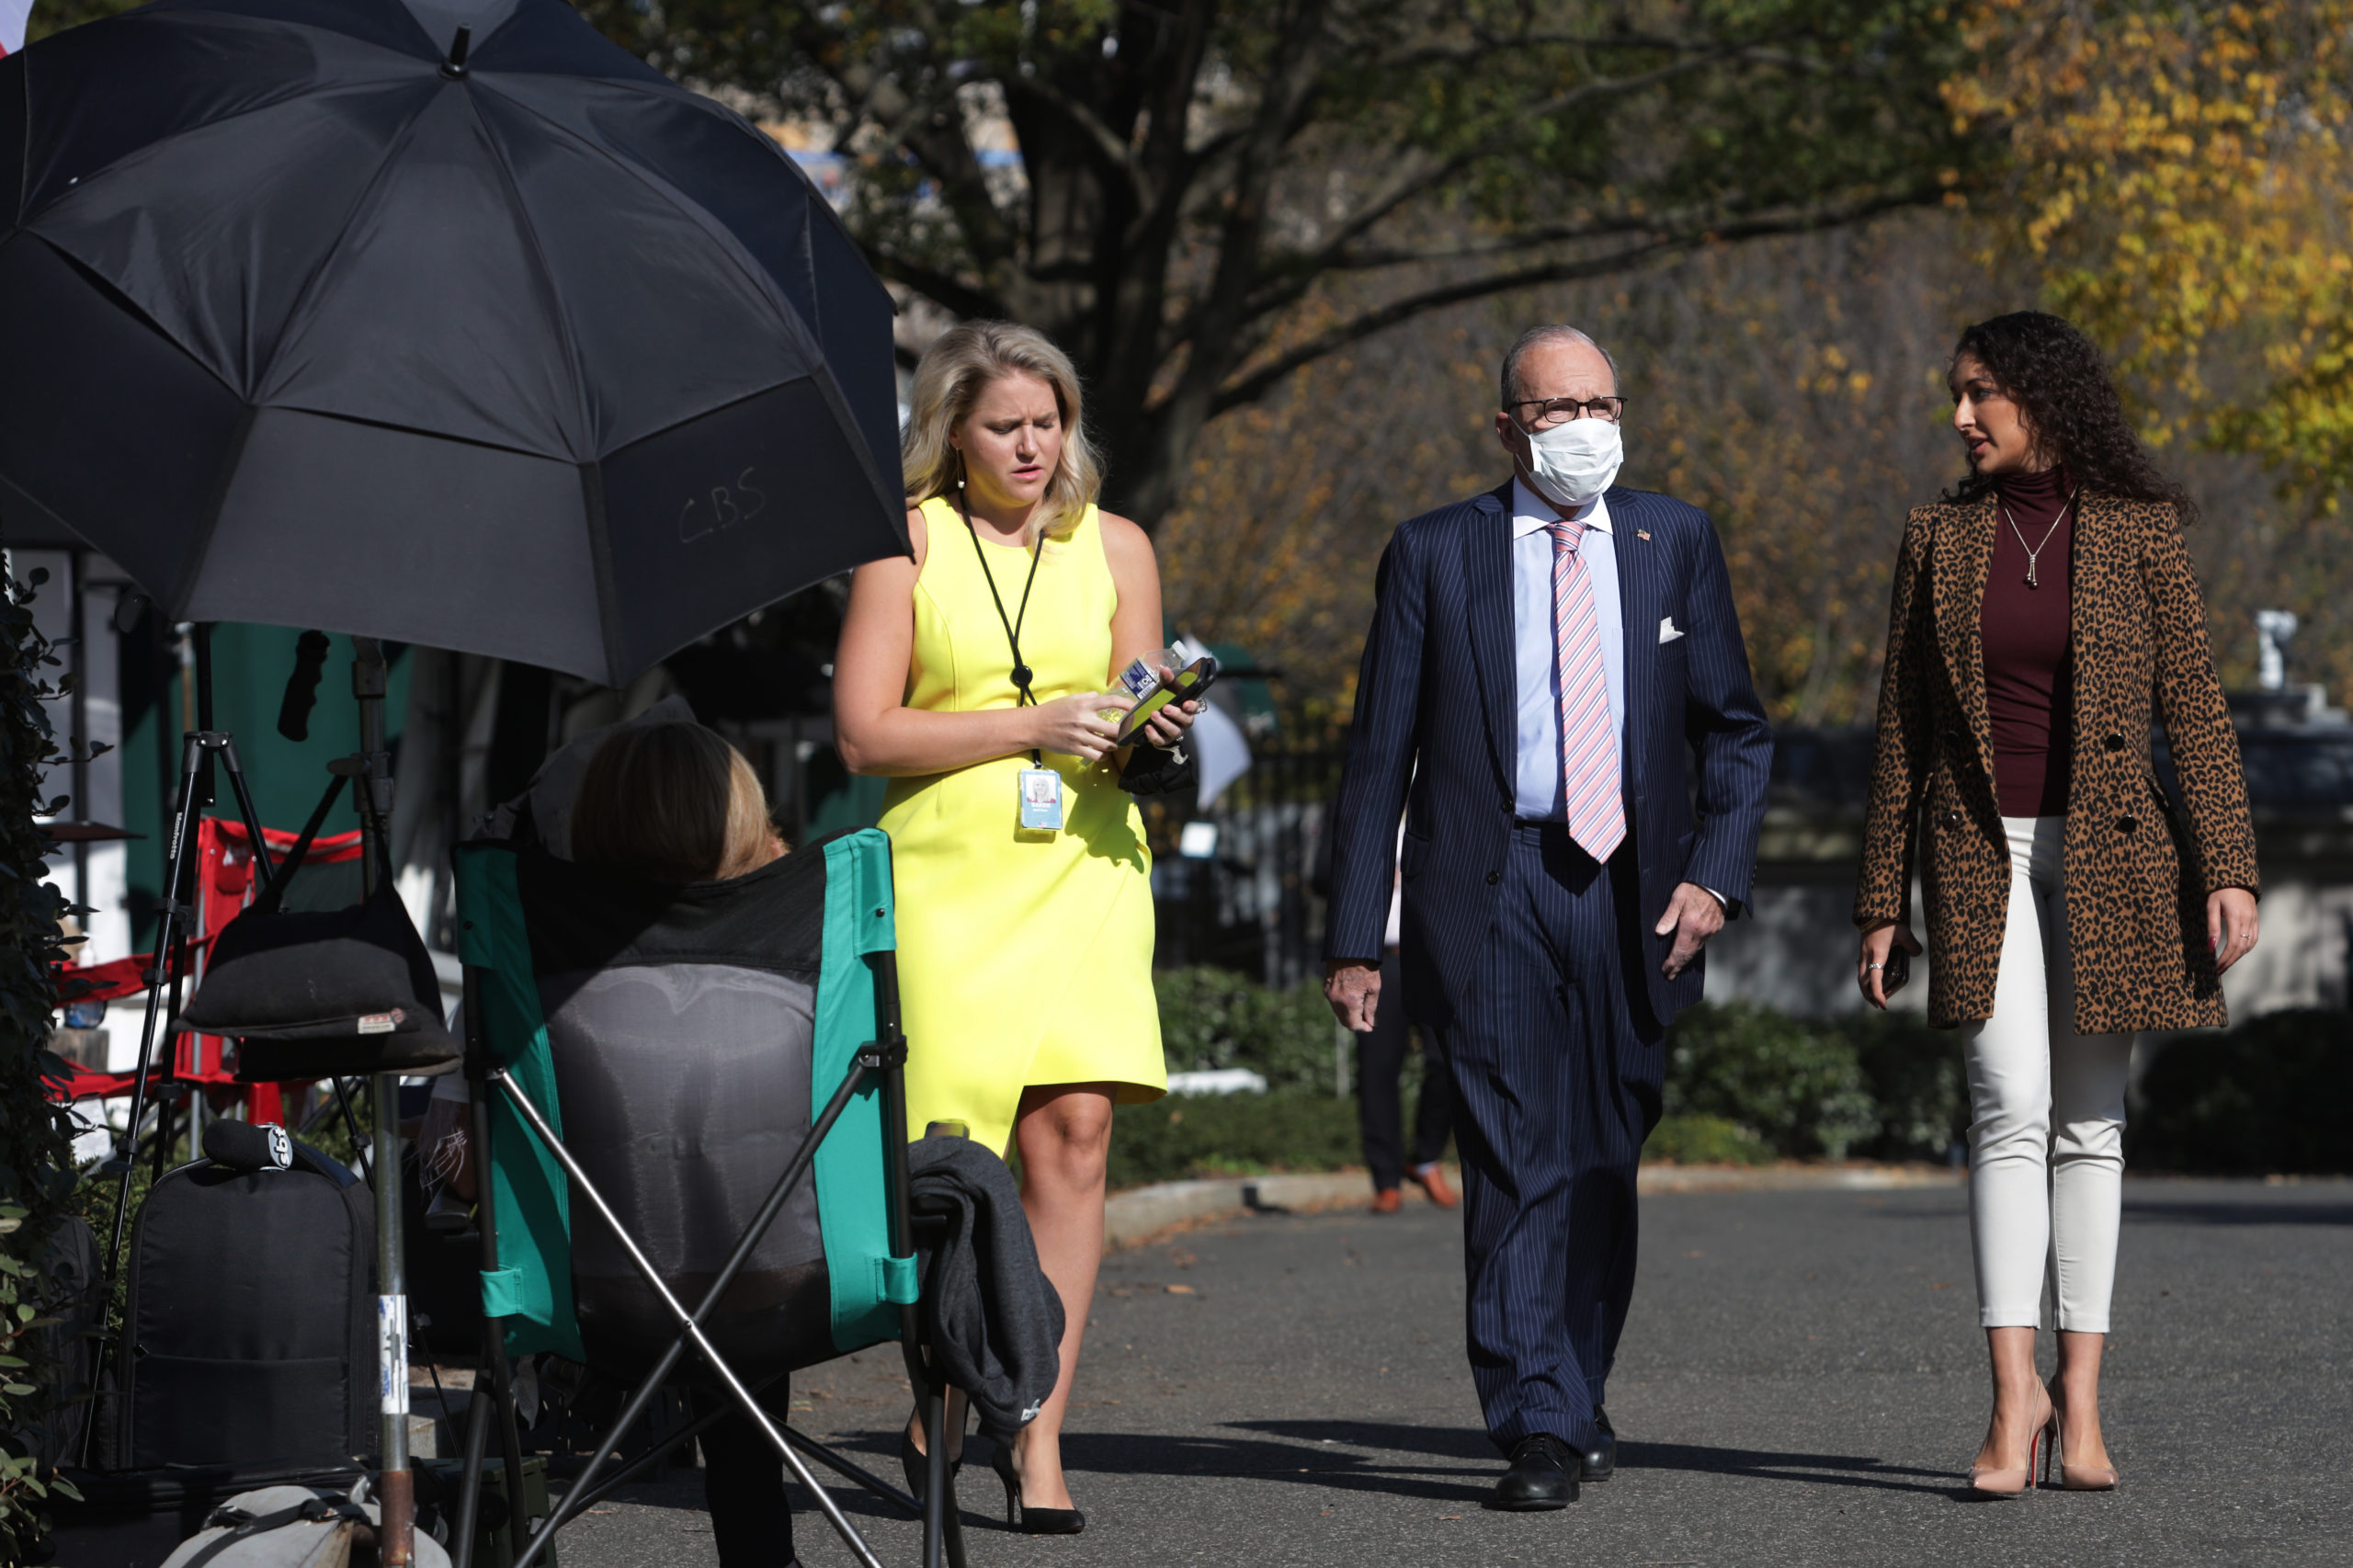 Director of the National Economic Council Larry Kudlow (C) walks towards to members of the press outside the West Wing of the White House November 6, 2020 in Washington, DC. (Alex Wong/Getty Images)